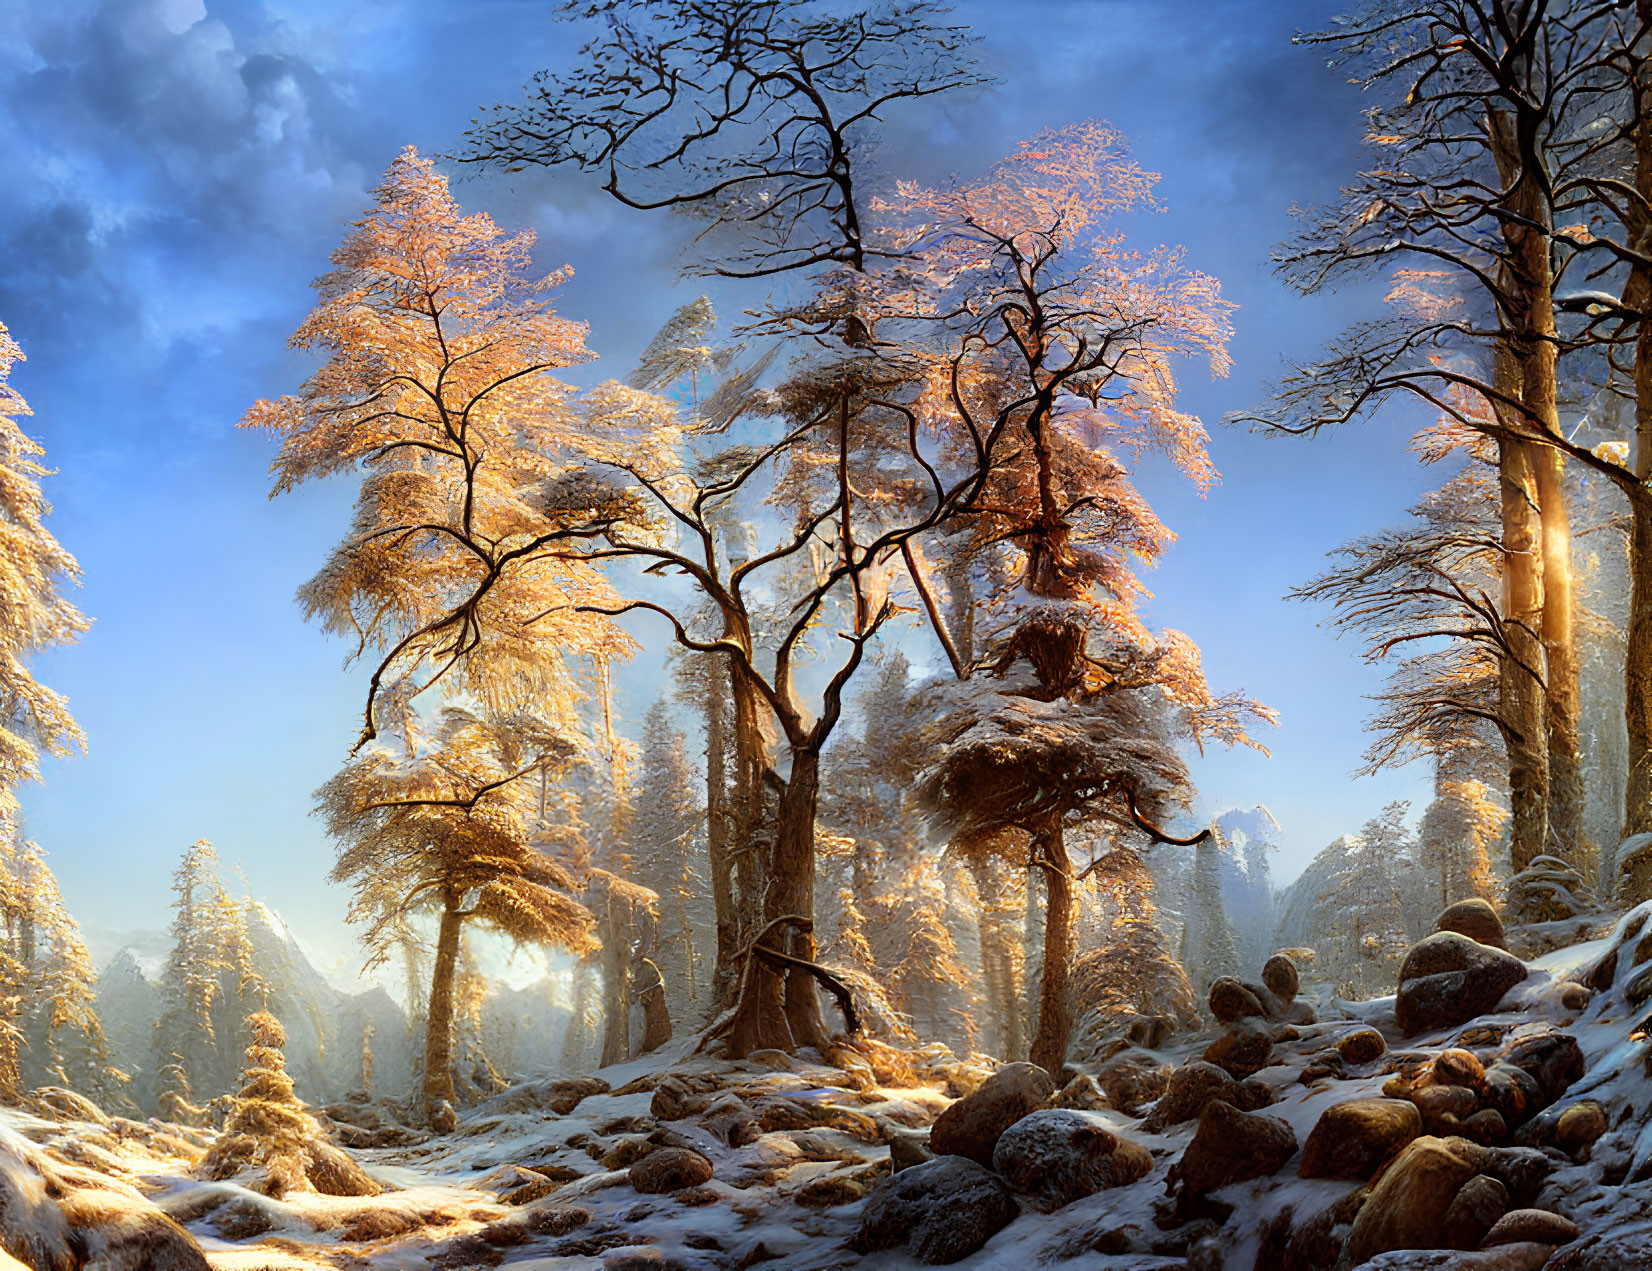 Snow-covered rocks and trees in serene winter forest scene